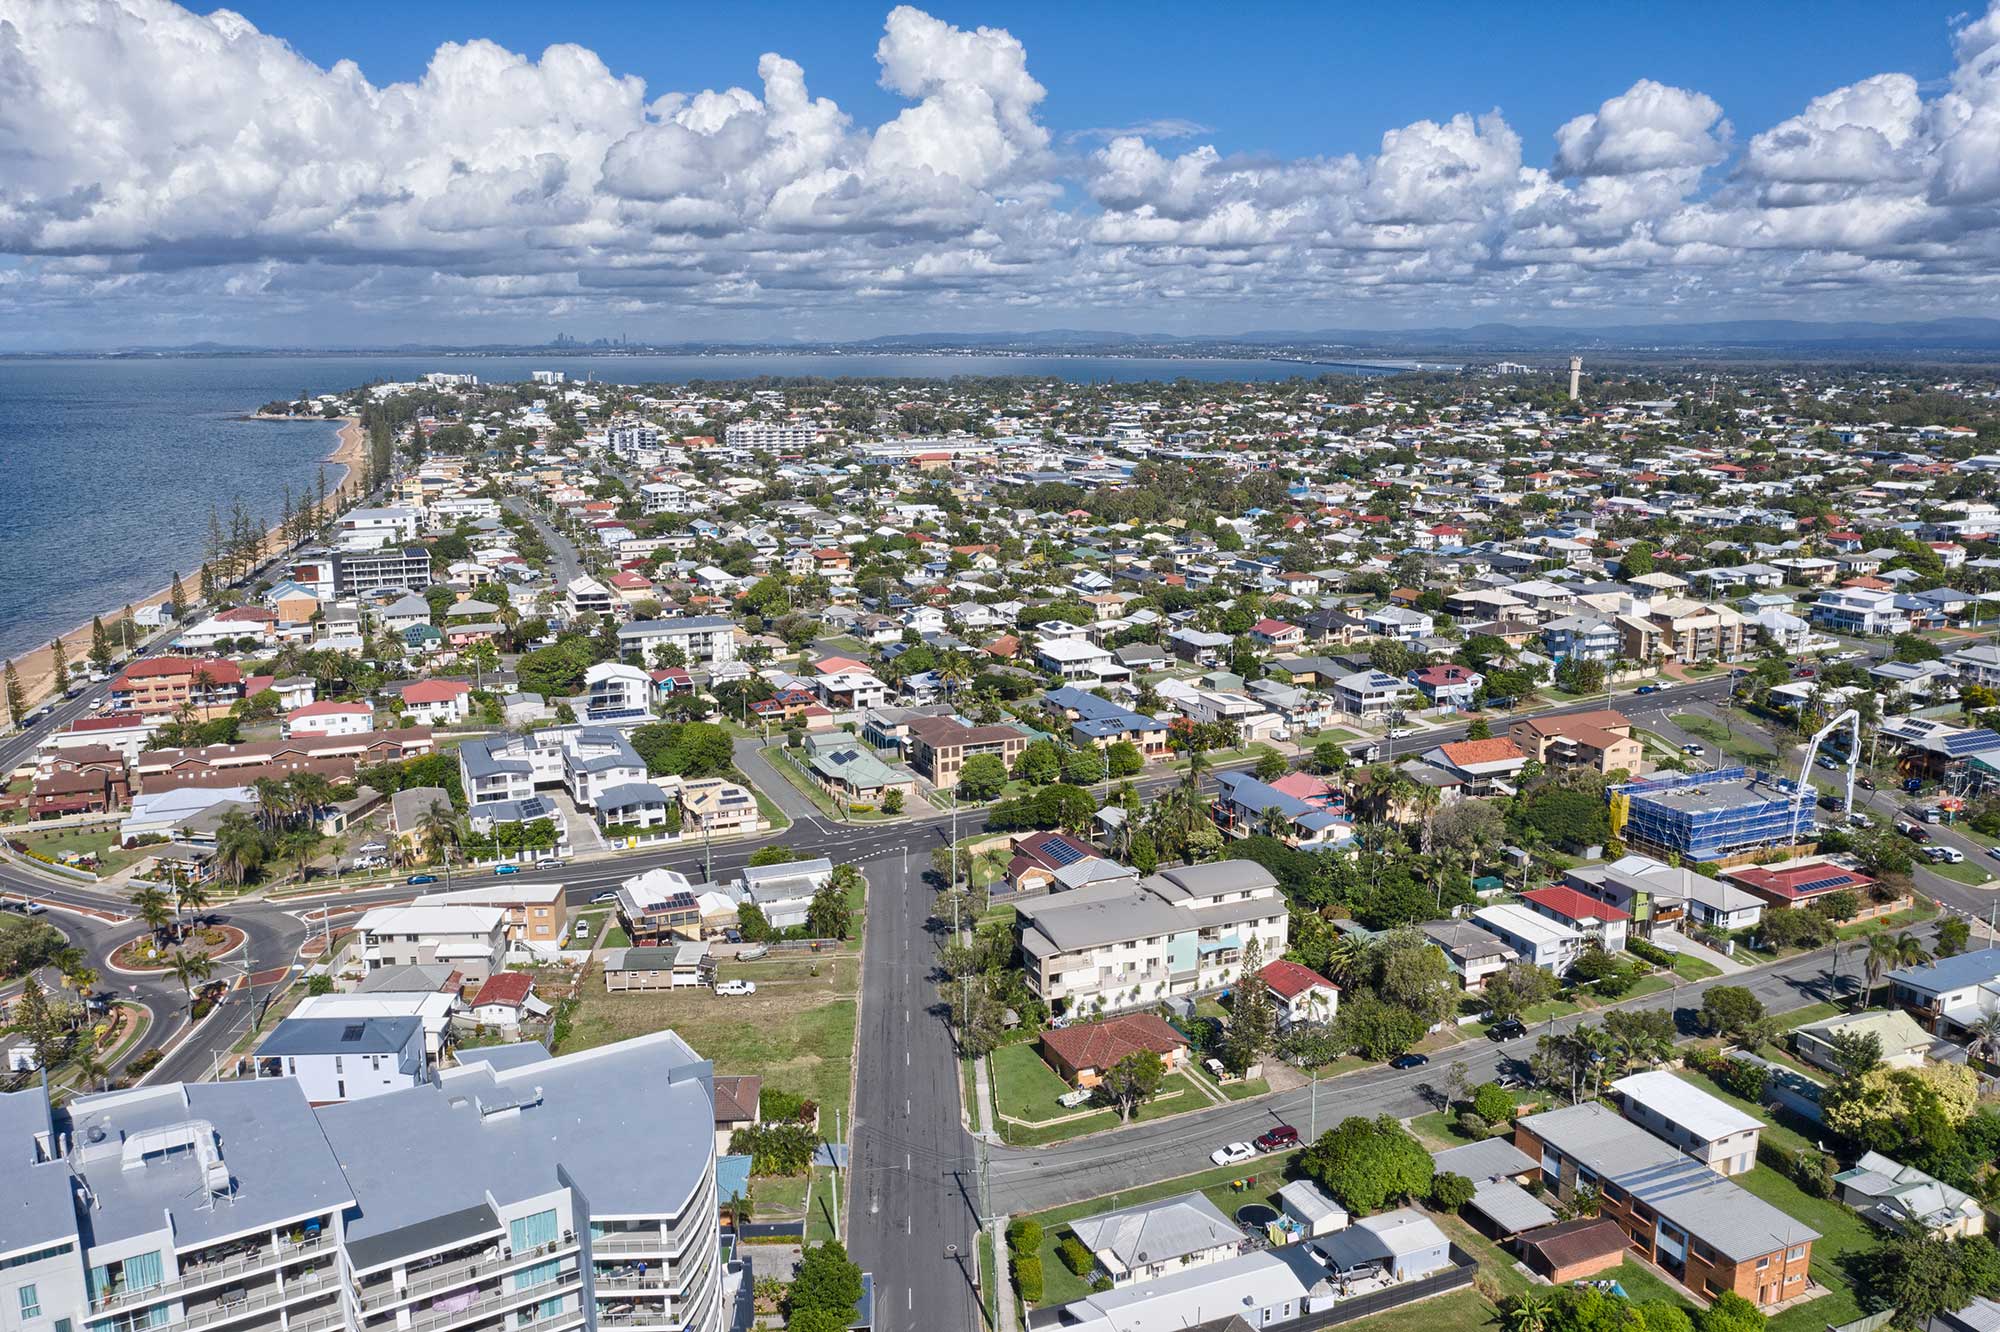 Drone photography at 37 Marine Parade for property development site - 70m looking south